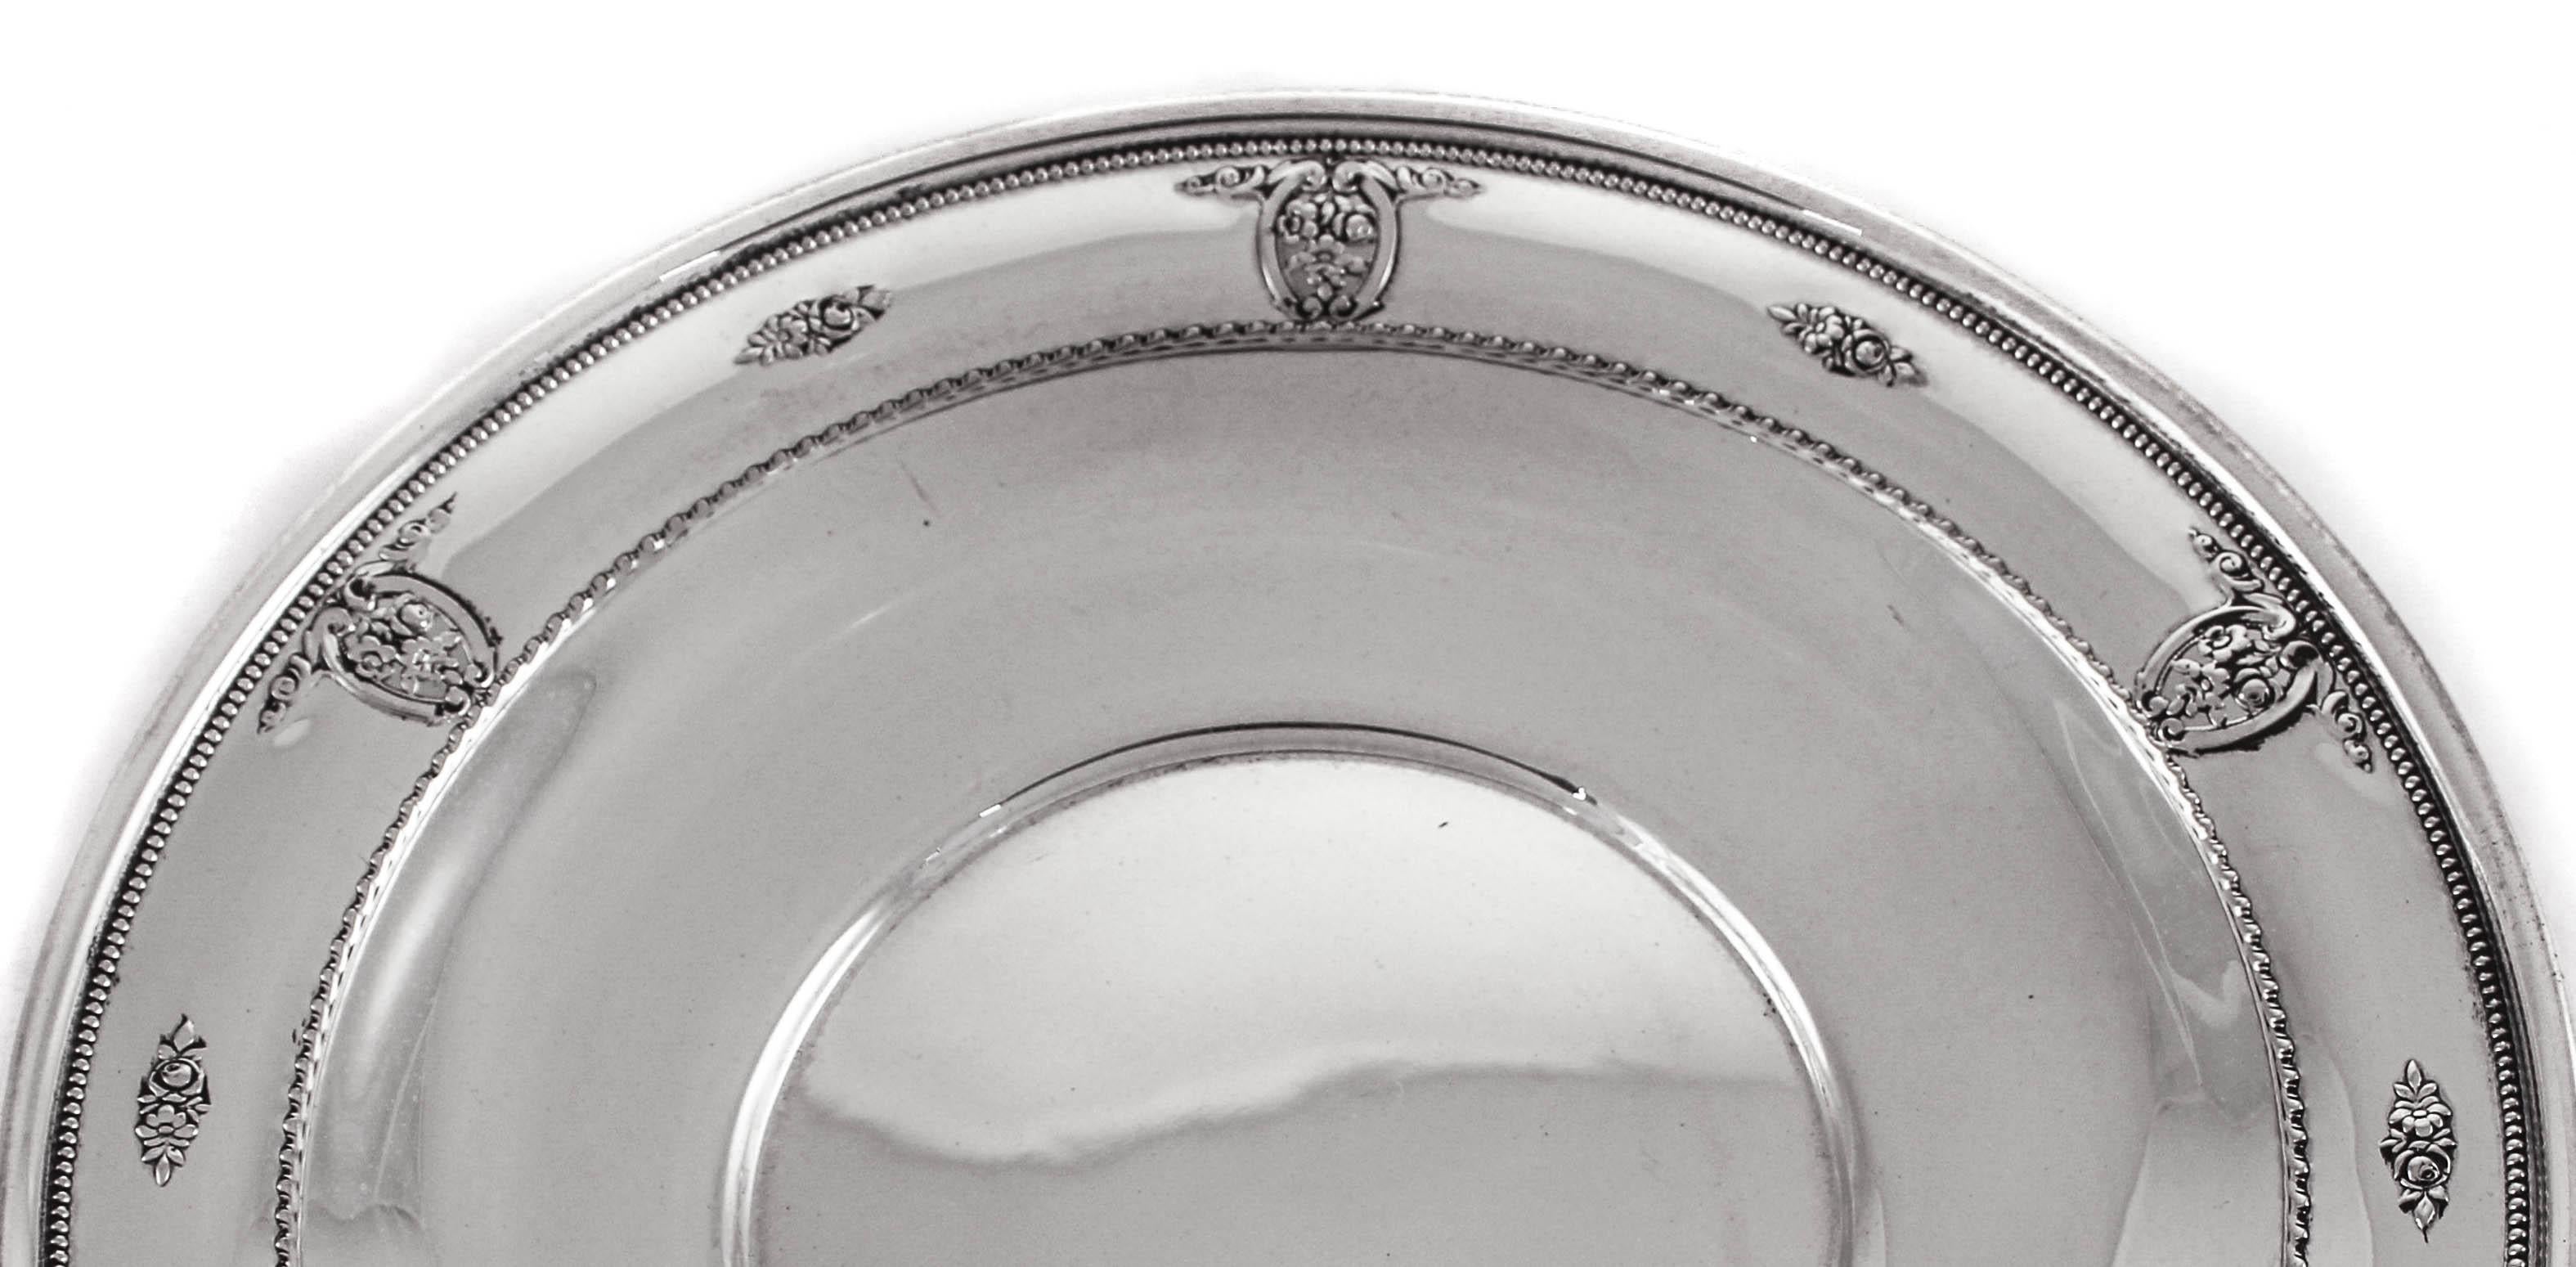 This dainty sterling plate is the ideal size for casual entertaining. It can be used for pastries, finger-food or even sweets. It has a rose motif around the border with cutout work intermittently.